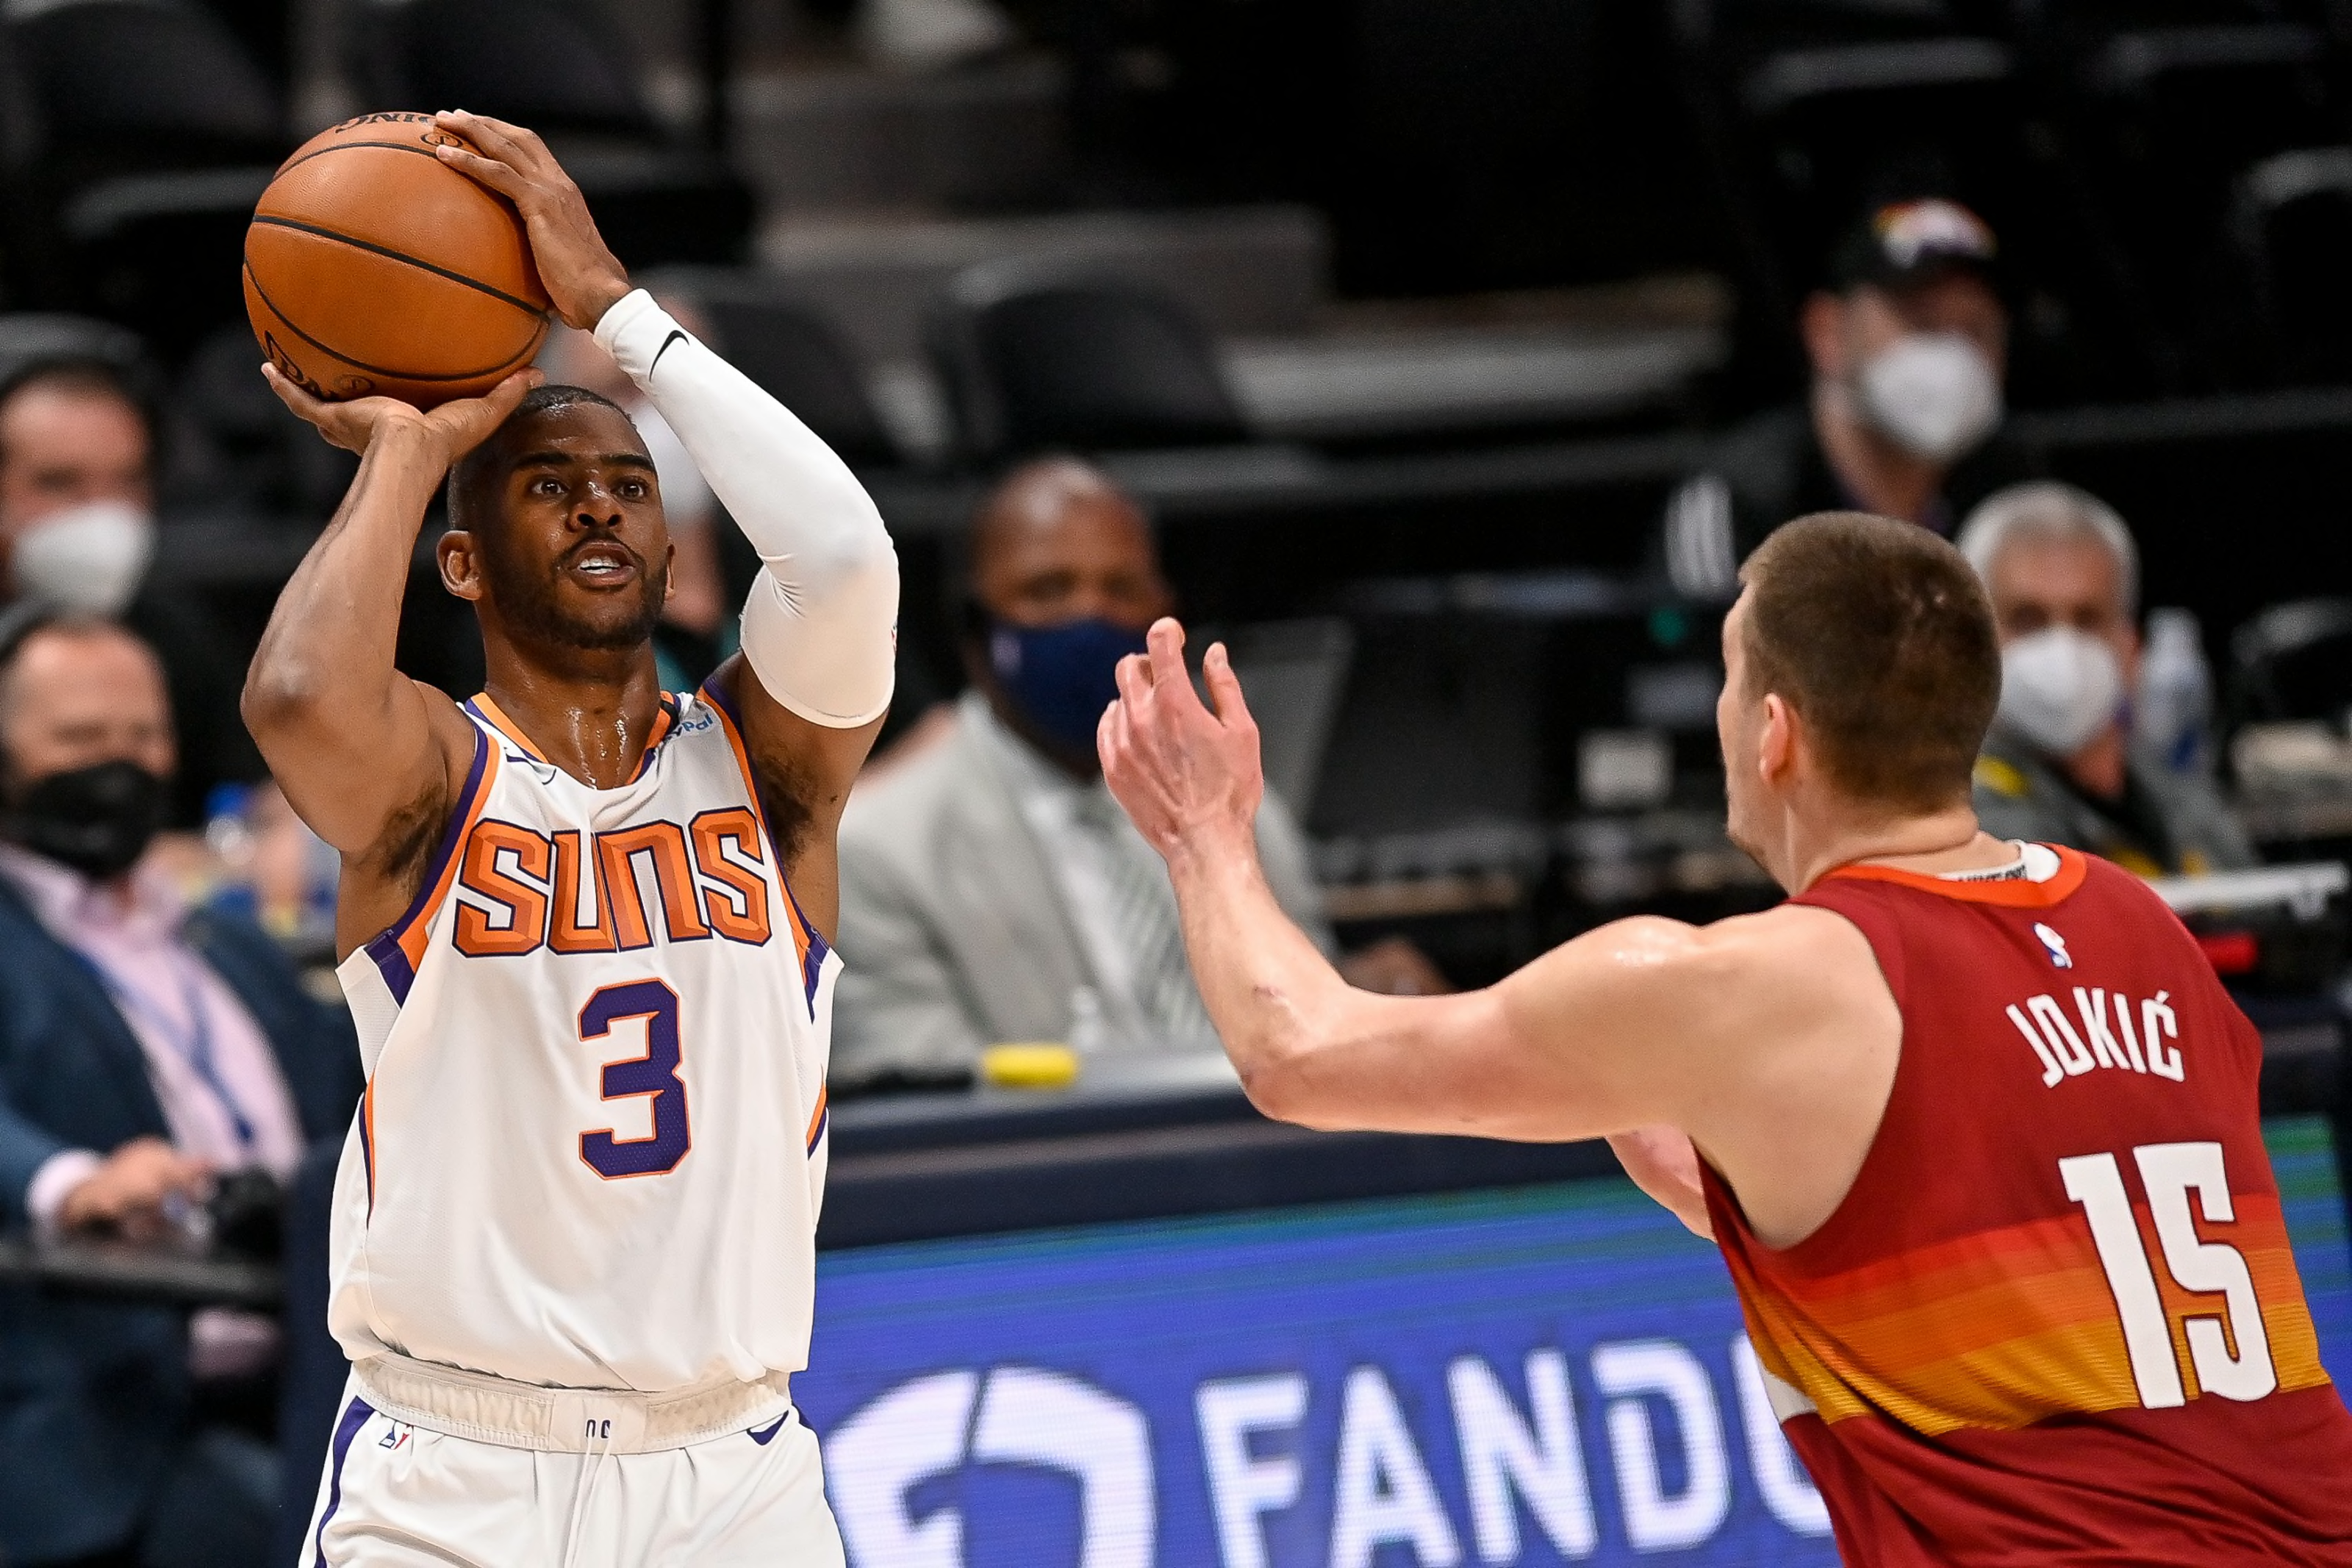 Chris Paul, Phoenix Suns shoots and scores on a three-point attempt under coverage by Nikola Jokic, Denver Nuggets. (Photo by Dustin Bradford/Getty Images)